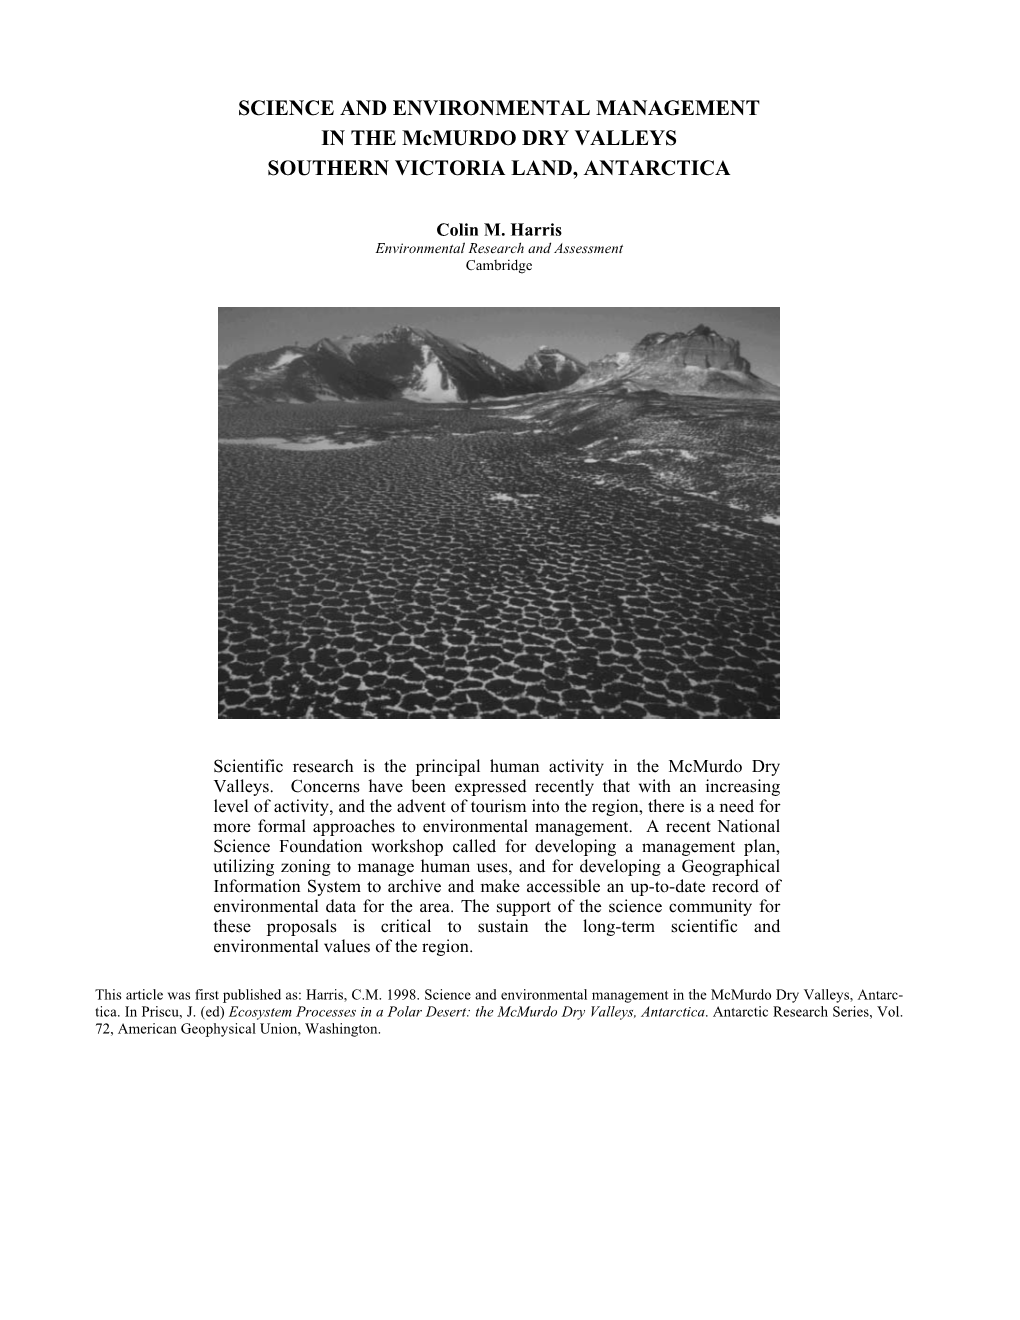 SCIENCE and ENVIRONMENTAL MANAGEMENT in the Mcmurdo DRY VALLEYS SOUTHERN VICTORIA LAND, ANTARCTICA